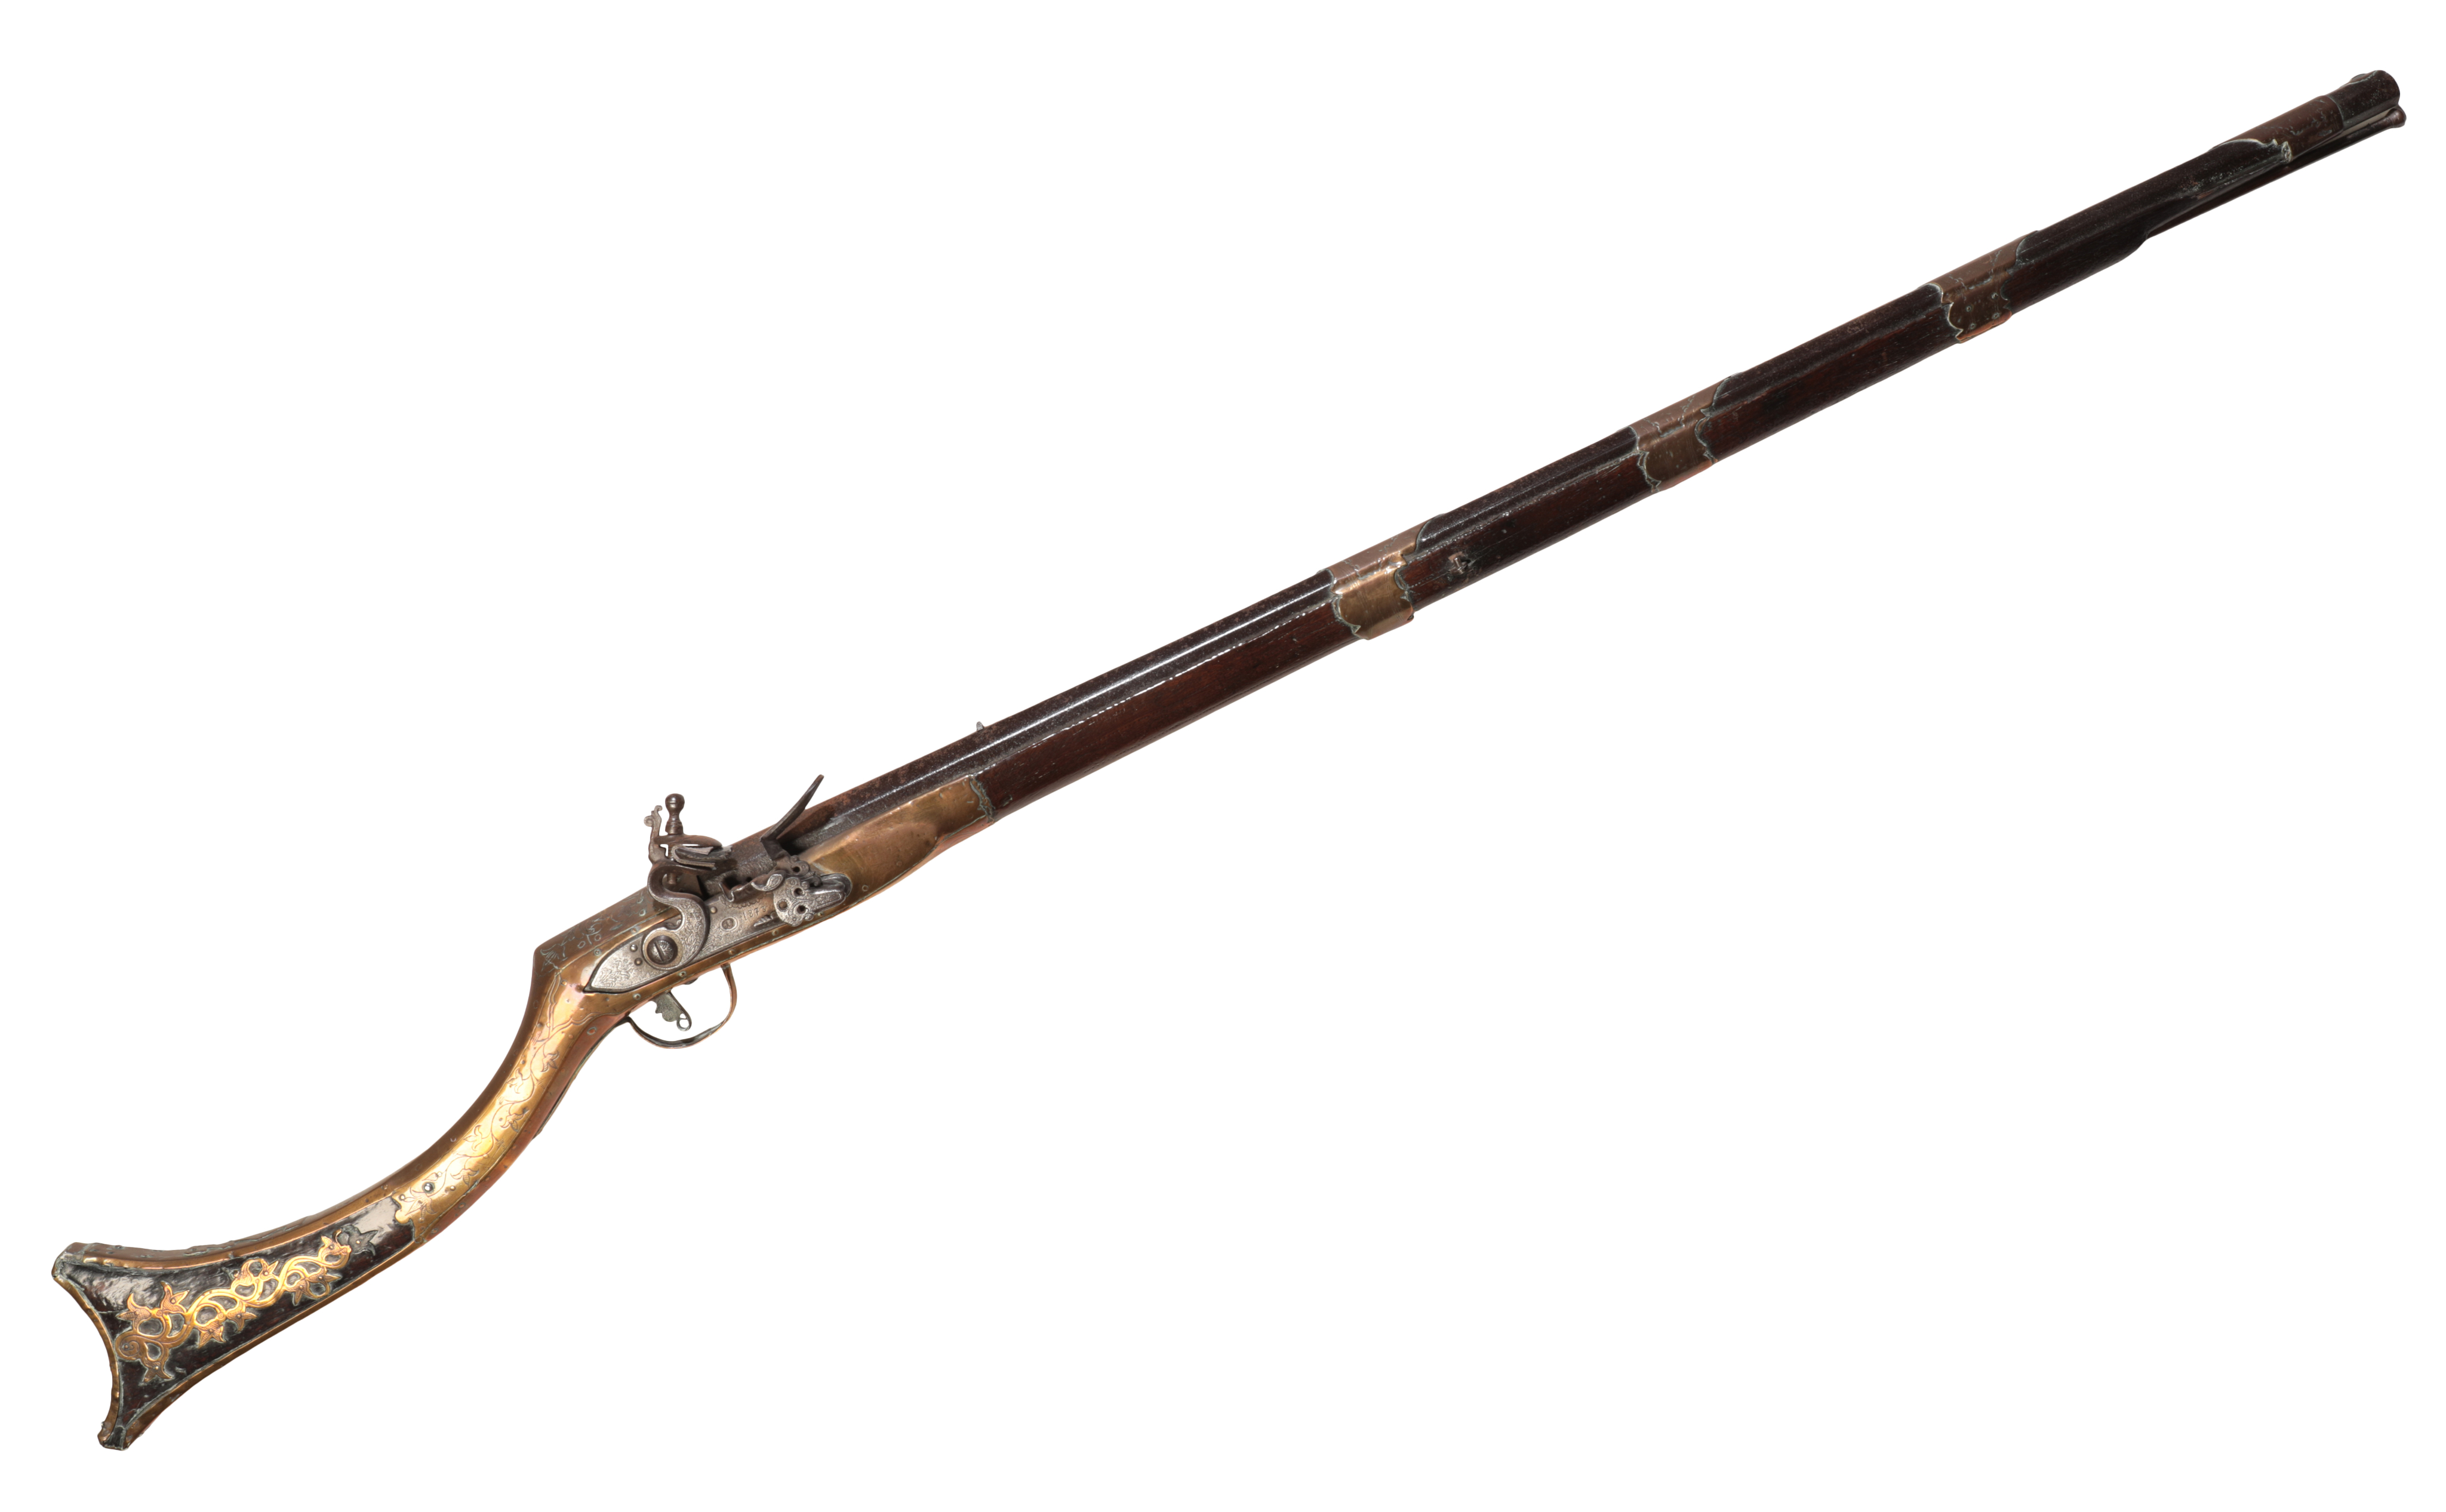 A FLINTLOCK MUSKET with a full 3ade44